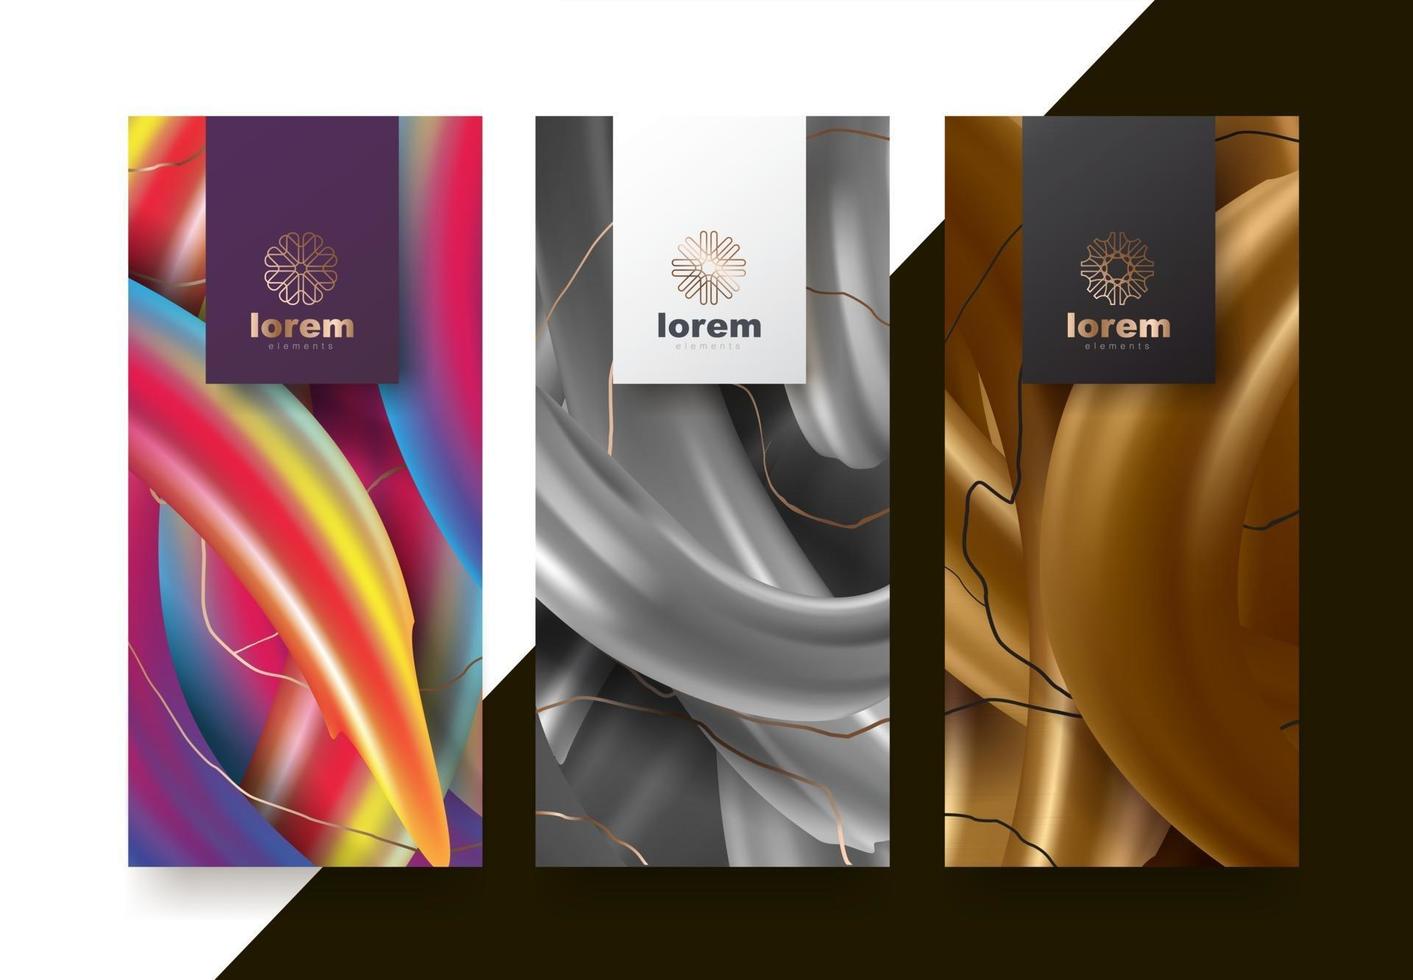 Vector set packaging templates with different texture for luxury products. logo design with trendy linear style.